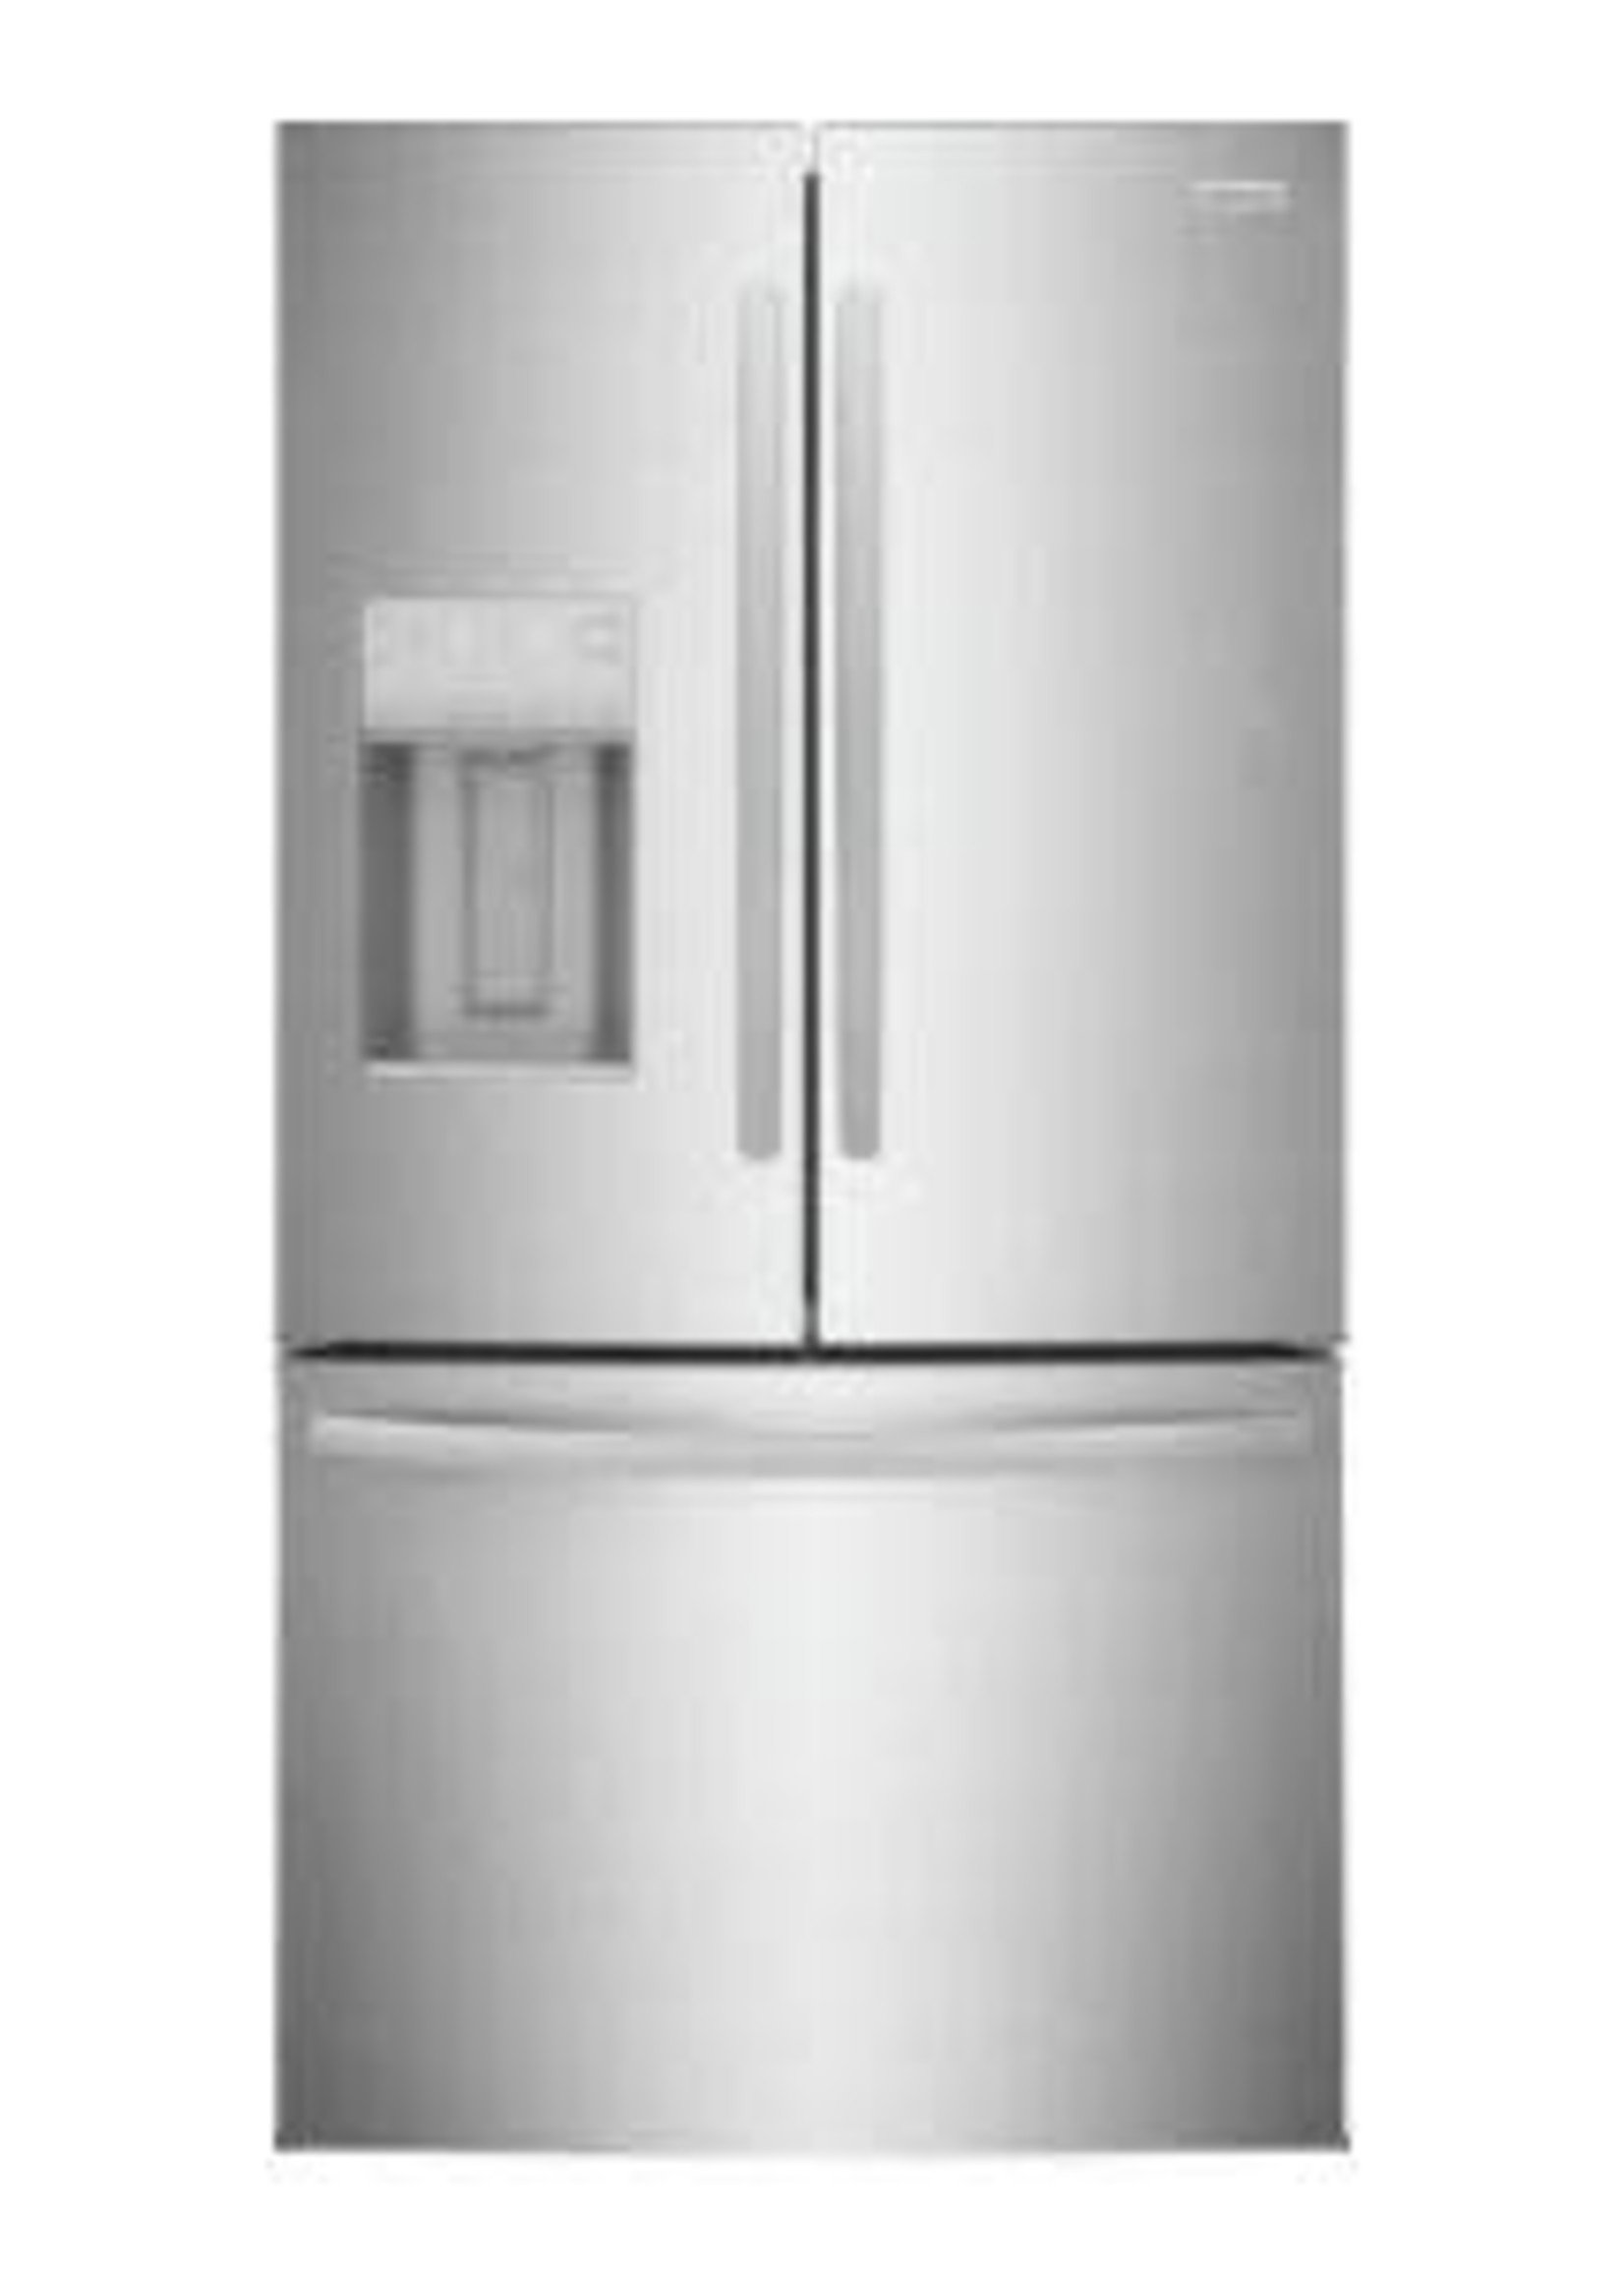 Frigidaire *Frigidaire FRFS282LAF   27.8-cu ft French Door Refrigerator with Ice Maker (Easycare Stainless Steel) ENERGY STAR